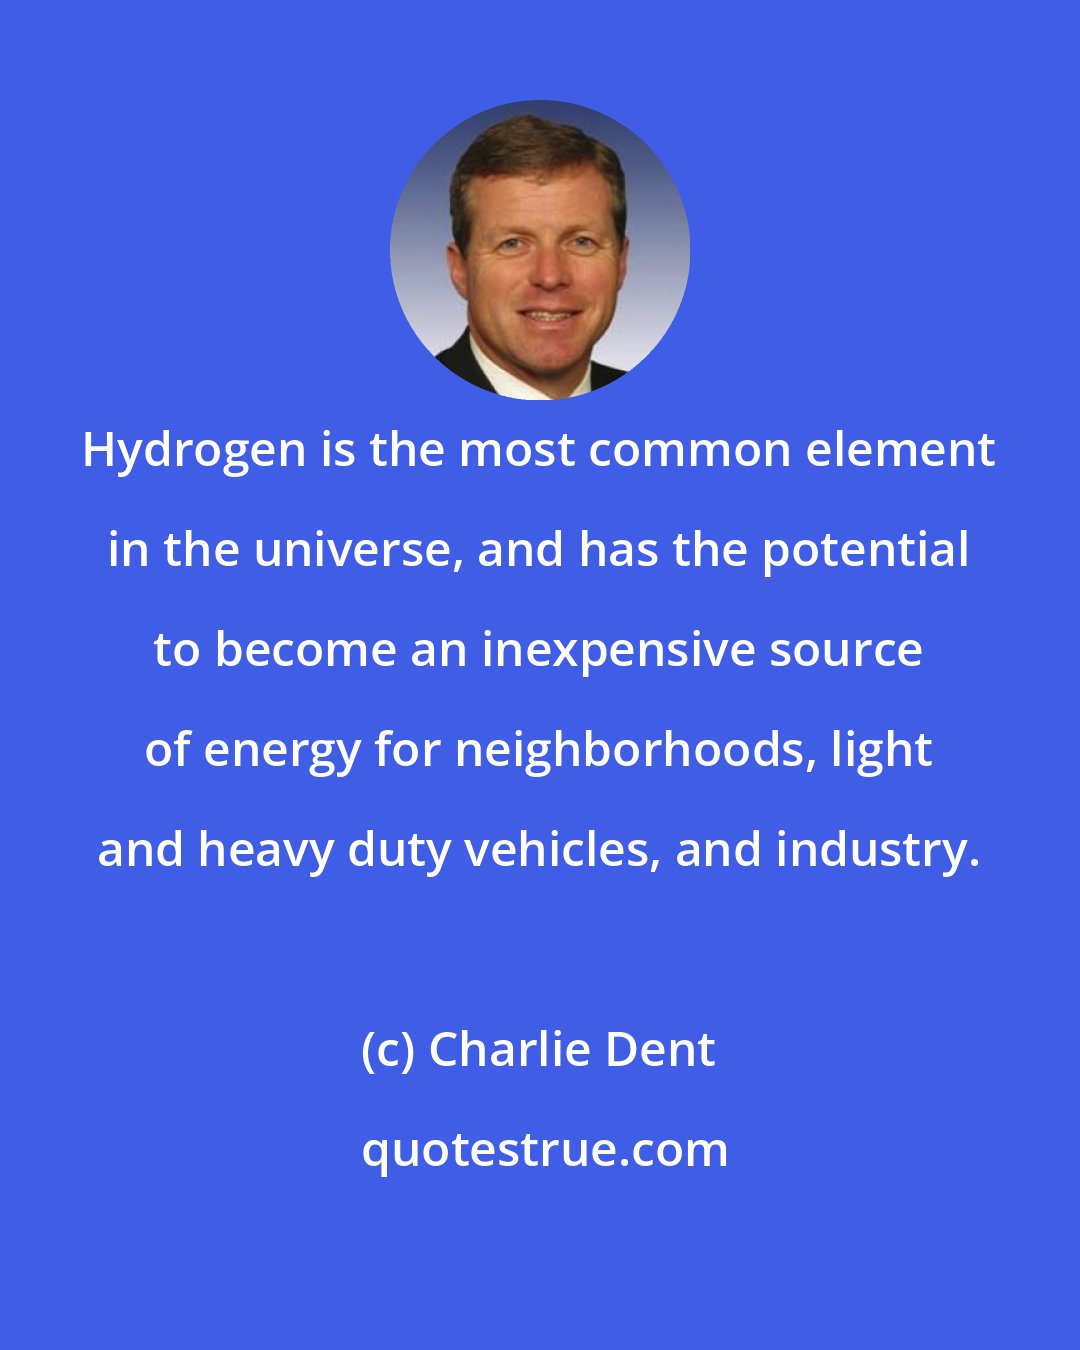 Charlie Dent: Hydrogen is the most common element in the universe, and has the potential to become an inexpensive source of energy for neighborhoods, light and heavy duty vehicles, and industry.